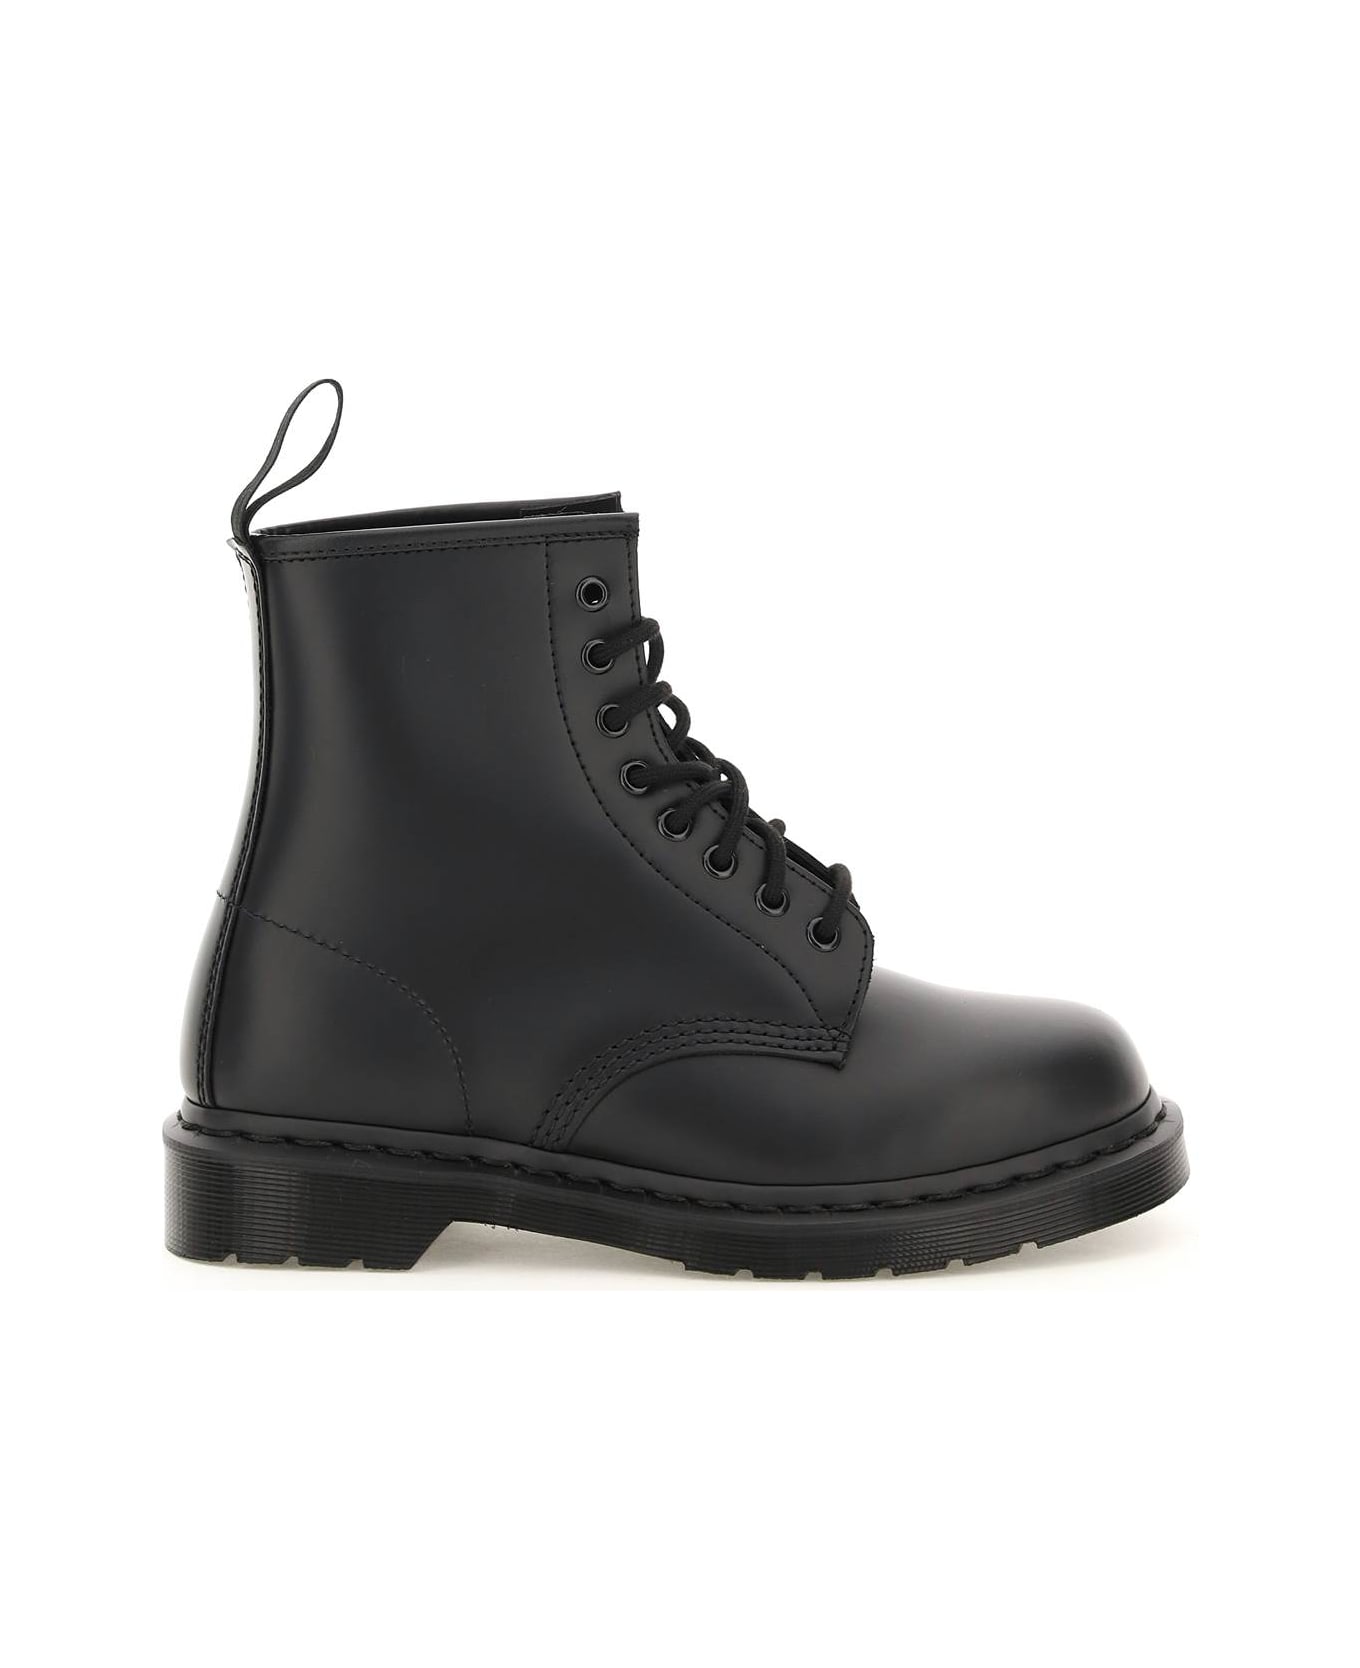 Dr. Martens 1460 Mono Smooth Lace-up Combat Boots - black ブーツ